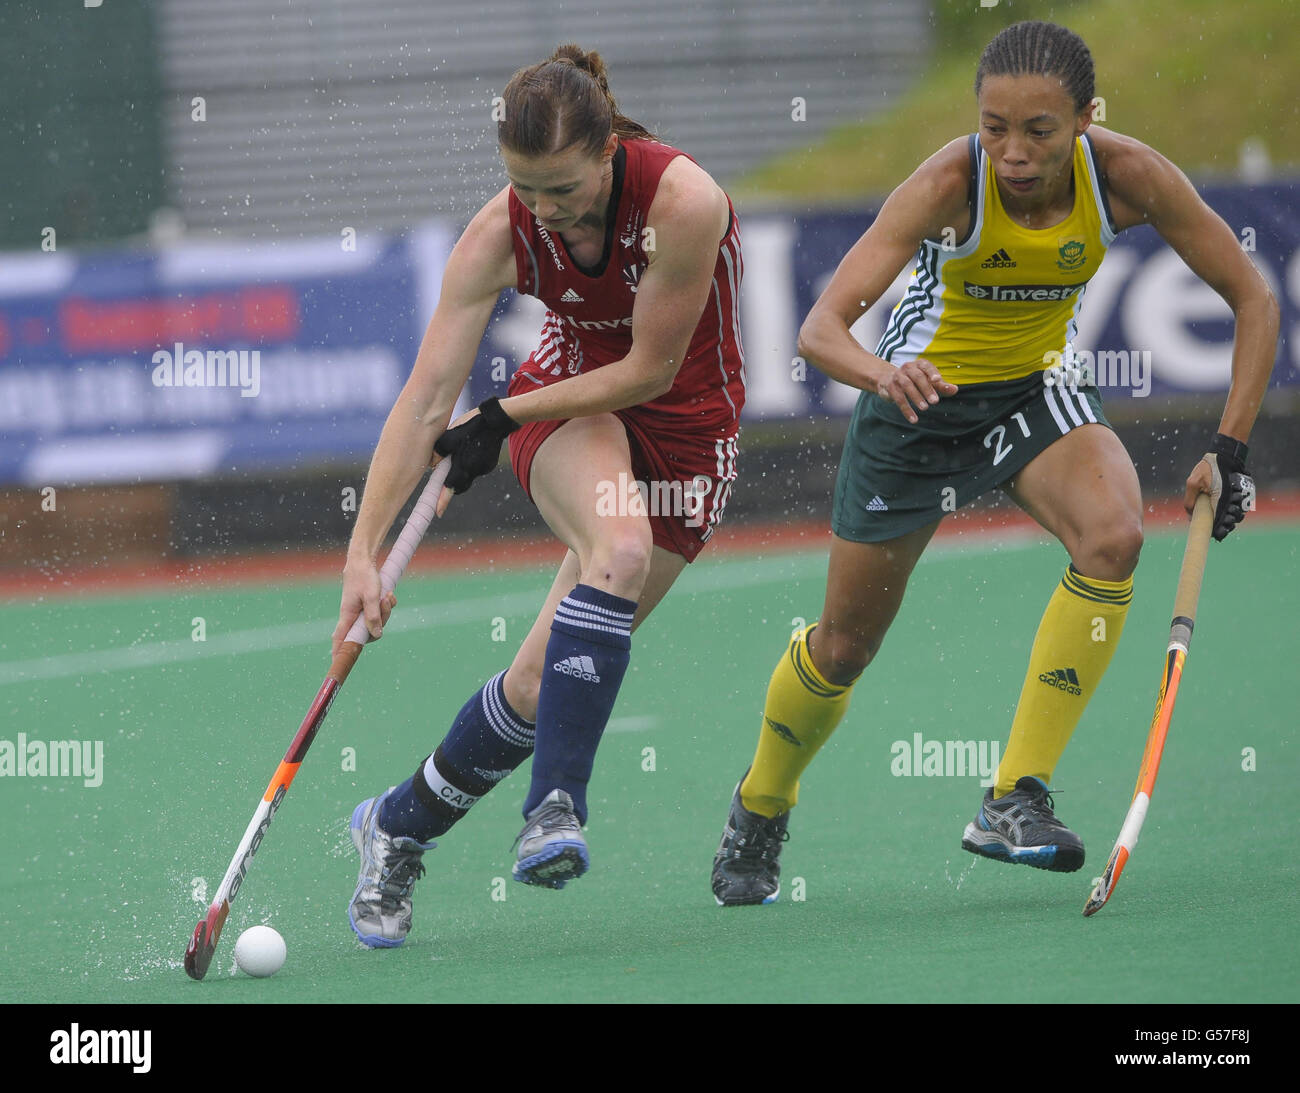 Great Britain's Helen Richardson challenges South Africa's Lenise Marais during their pool game in the Investec London Cup at the Quintin Hogg Memorial Ground, London. Stock Photo